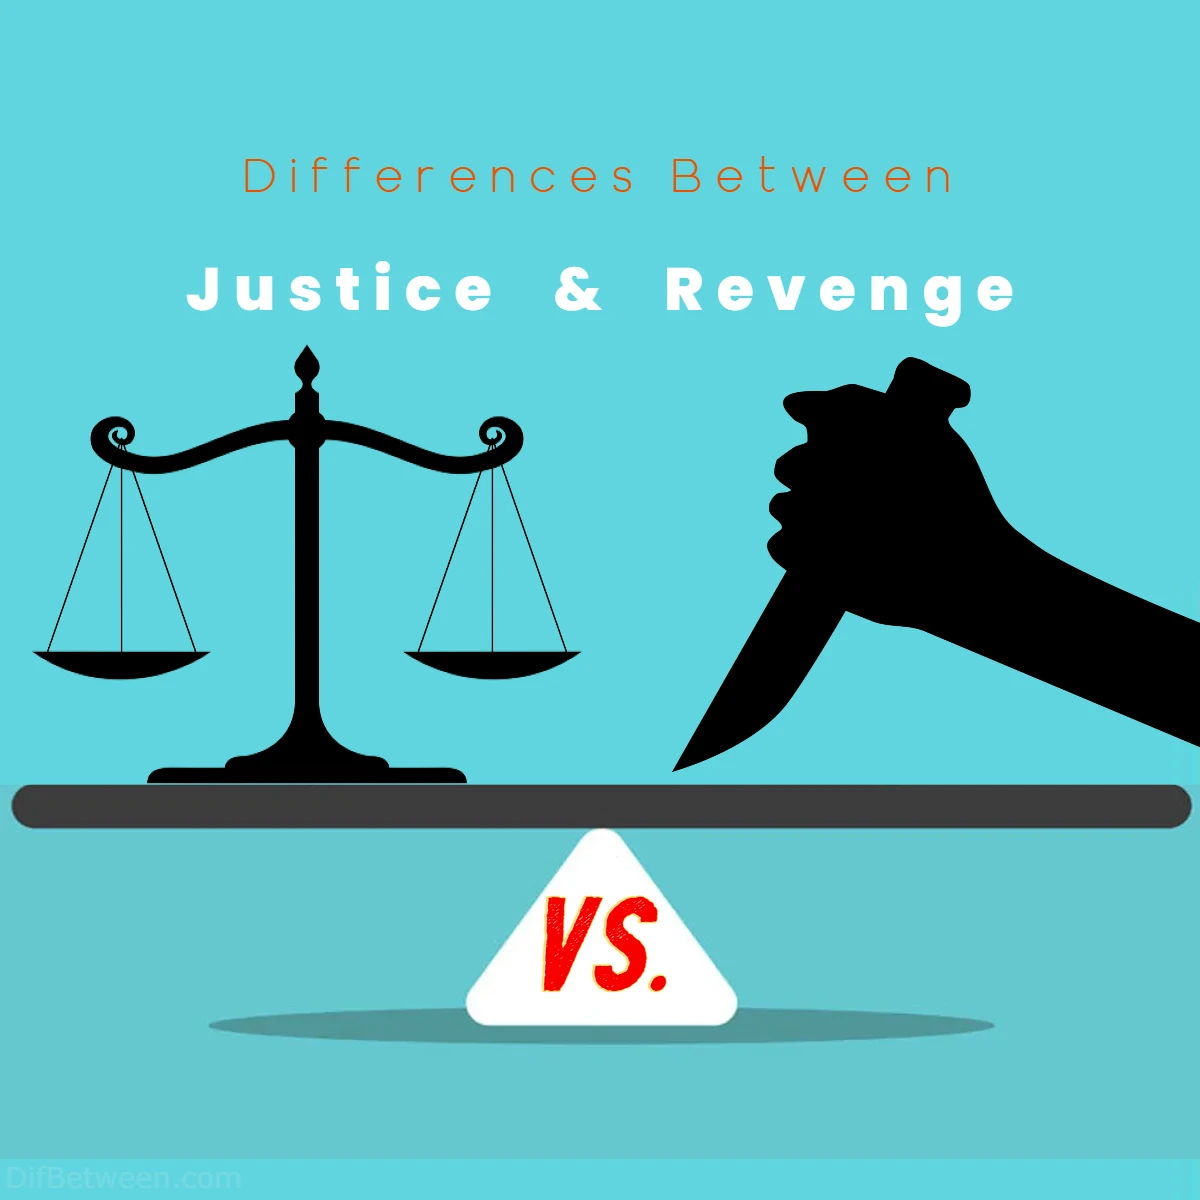 Differences Between Justice vs Revenge